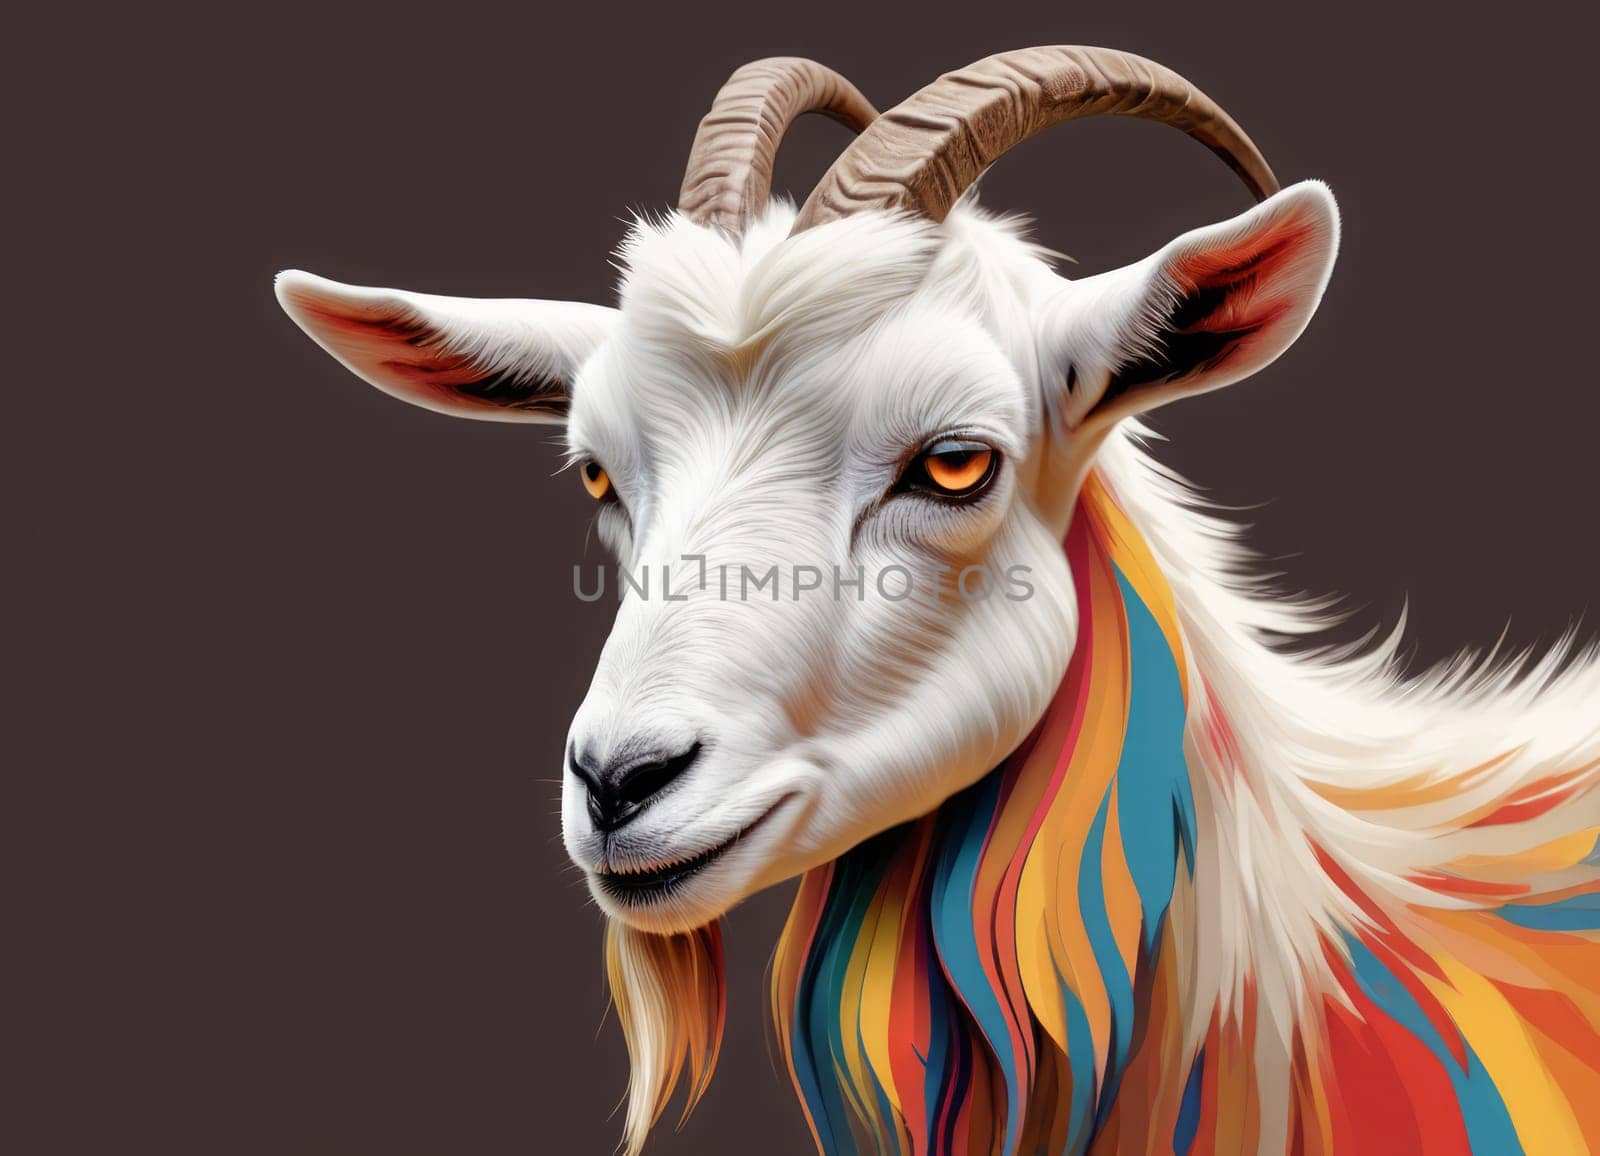 The image portrays a vibrantly colored illustration of a goat. The use of bright, contrasting colors and detailed shading gives the artwork a lively and captivating appearance.